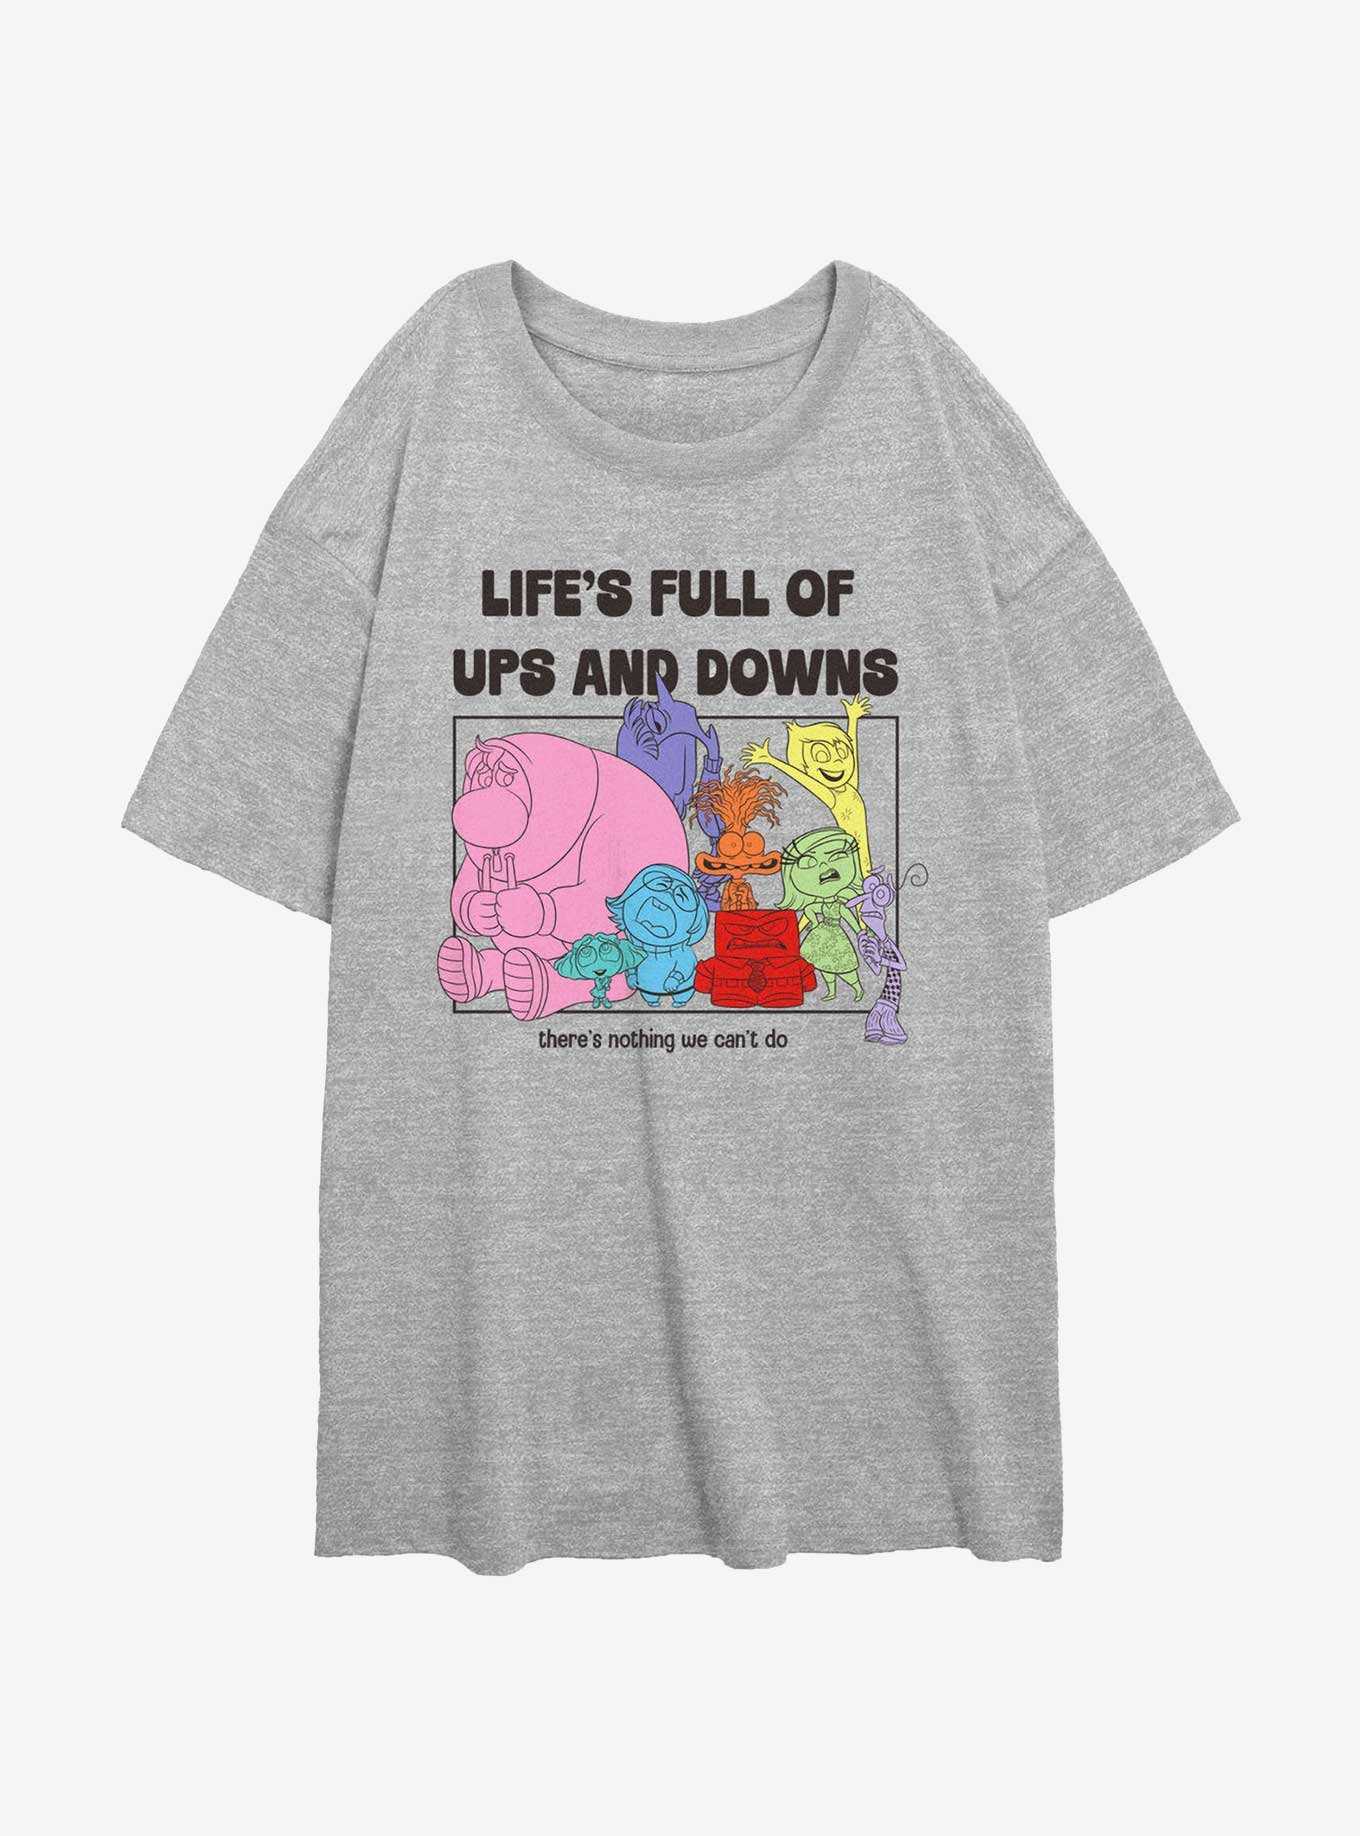 Disney Pixar Inside Out 2 Life's Full Of Ups And Downs Girls Oversized T-Shirt, , hi-res